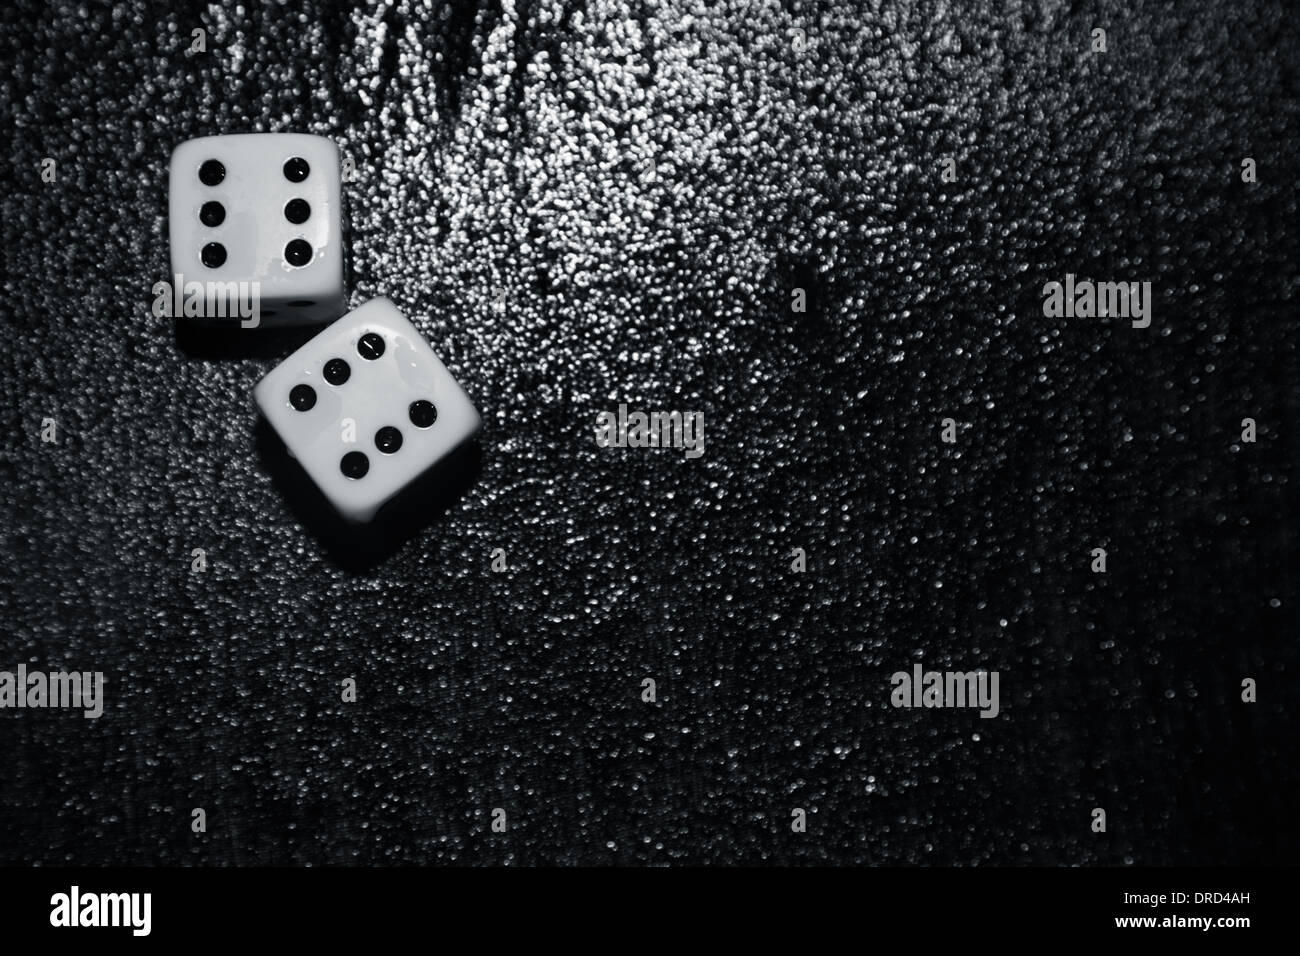 Gambling dices on a wet surface Stock Photo